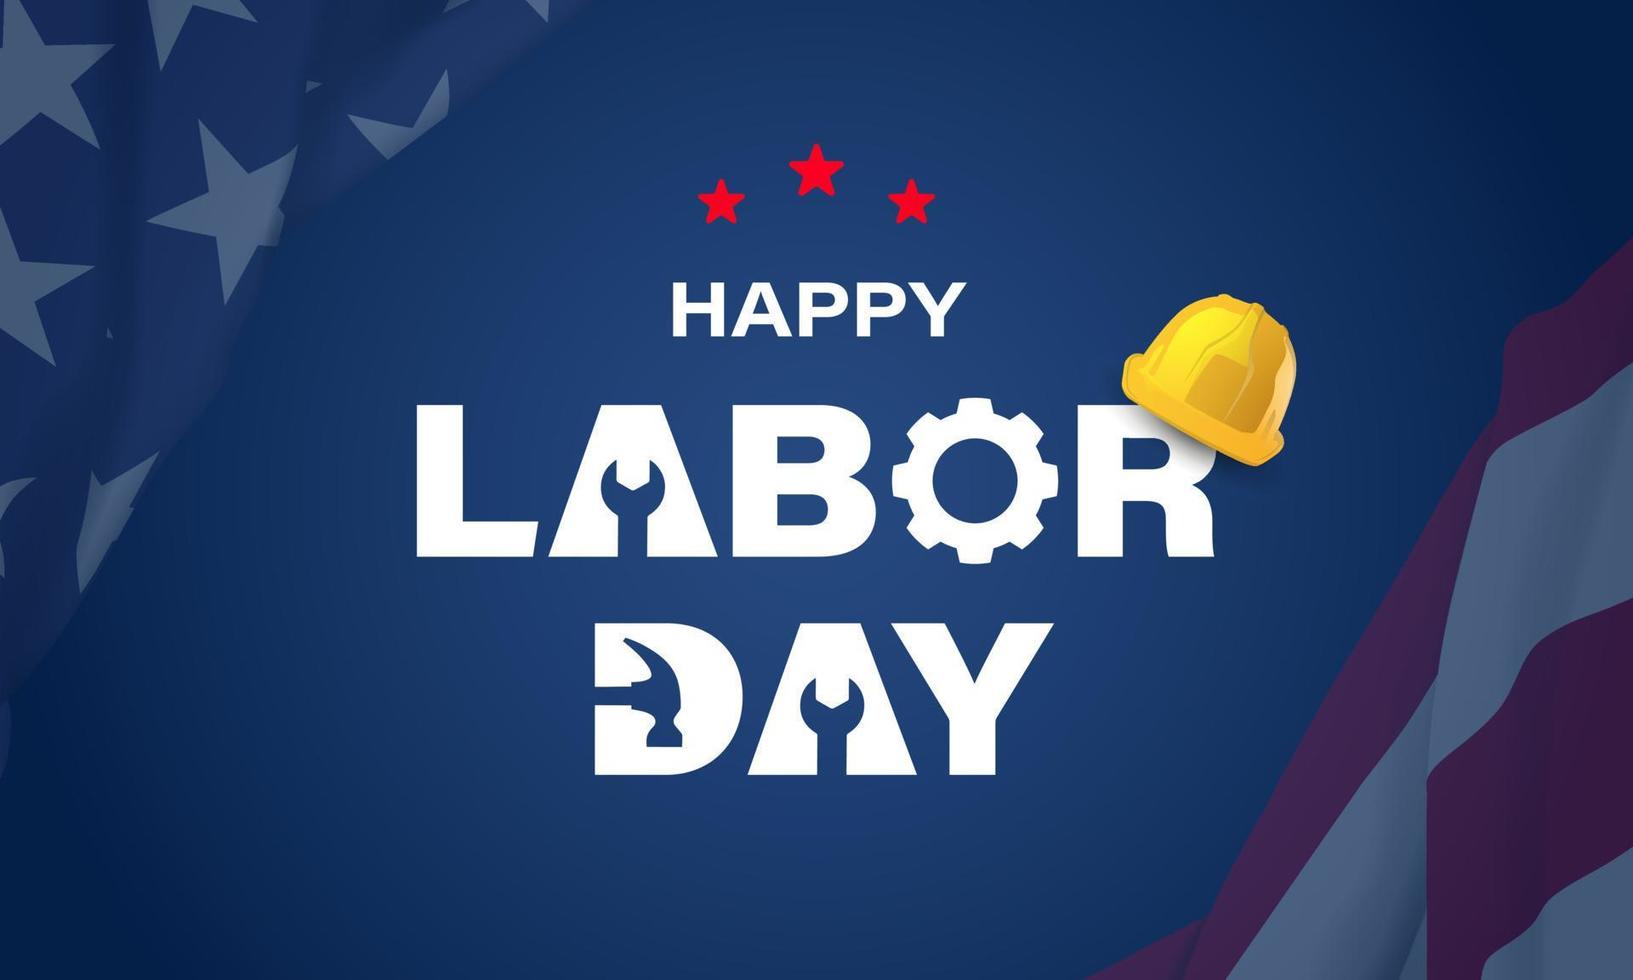 Happy Labor Day Background Design. Greeting Card, Banner, Poster. Vector Illustration.